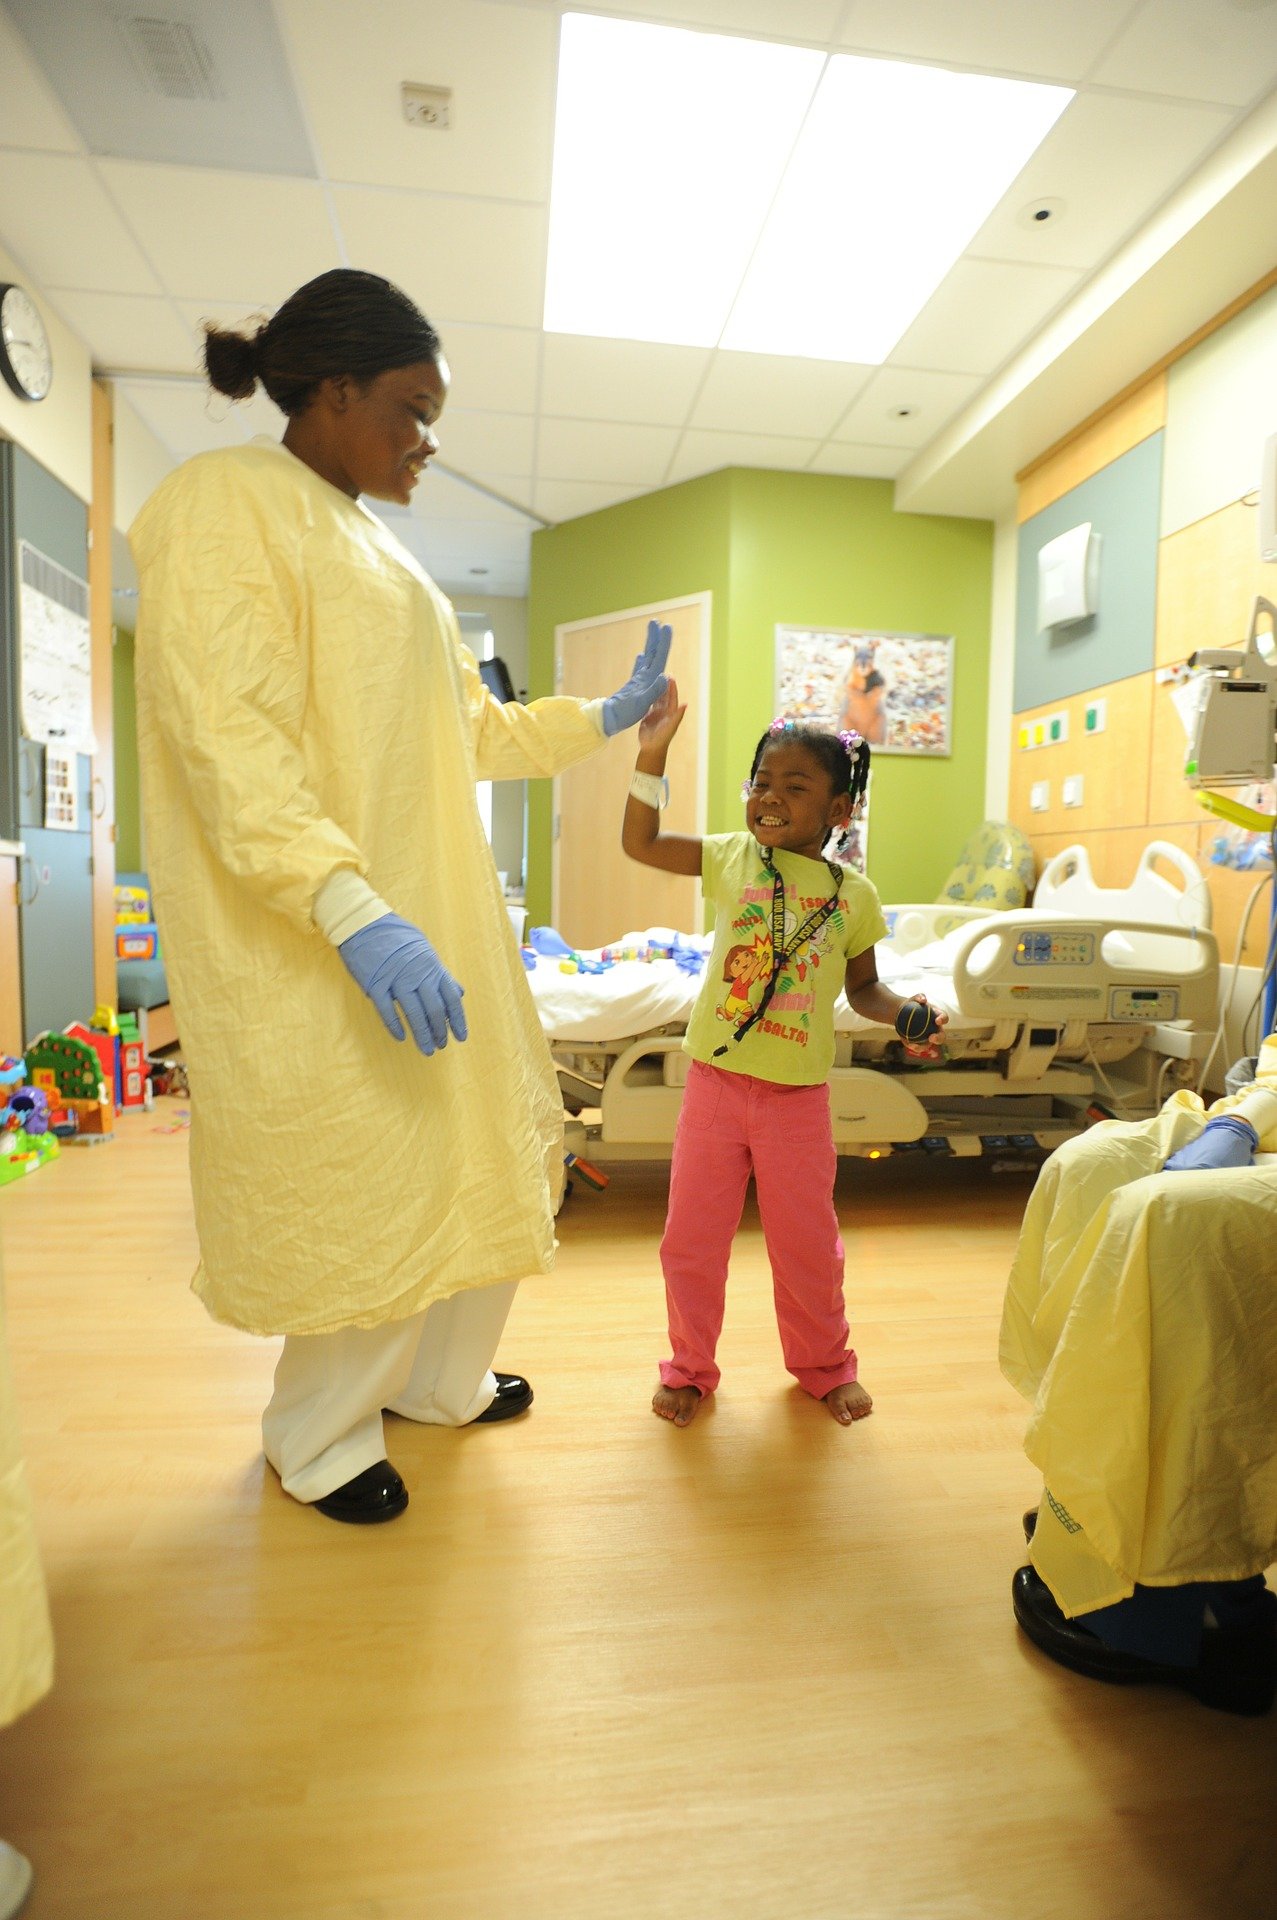 #Experts offer guidance on talking with children about racism at pediatrician’s office